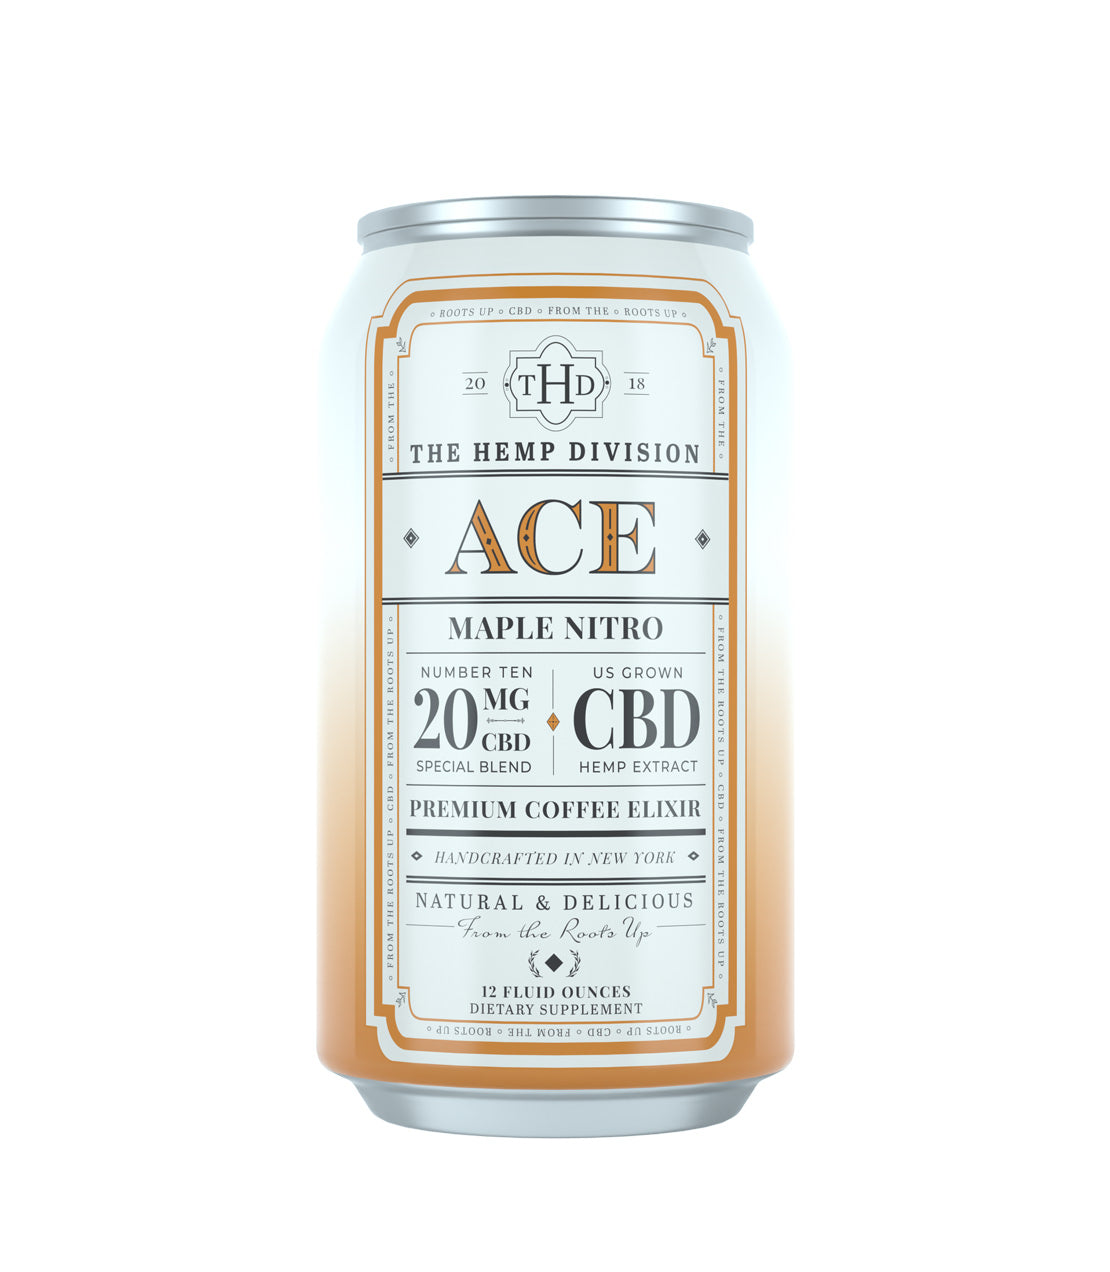 Ace - Case of 8 Cans - 20 MG CBD